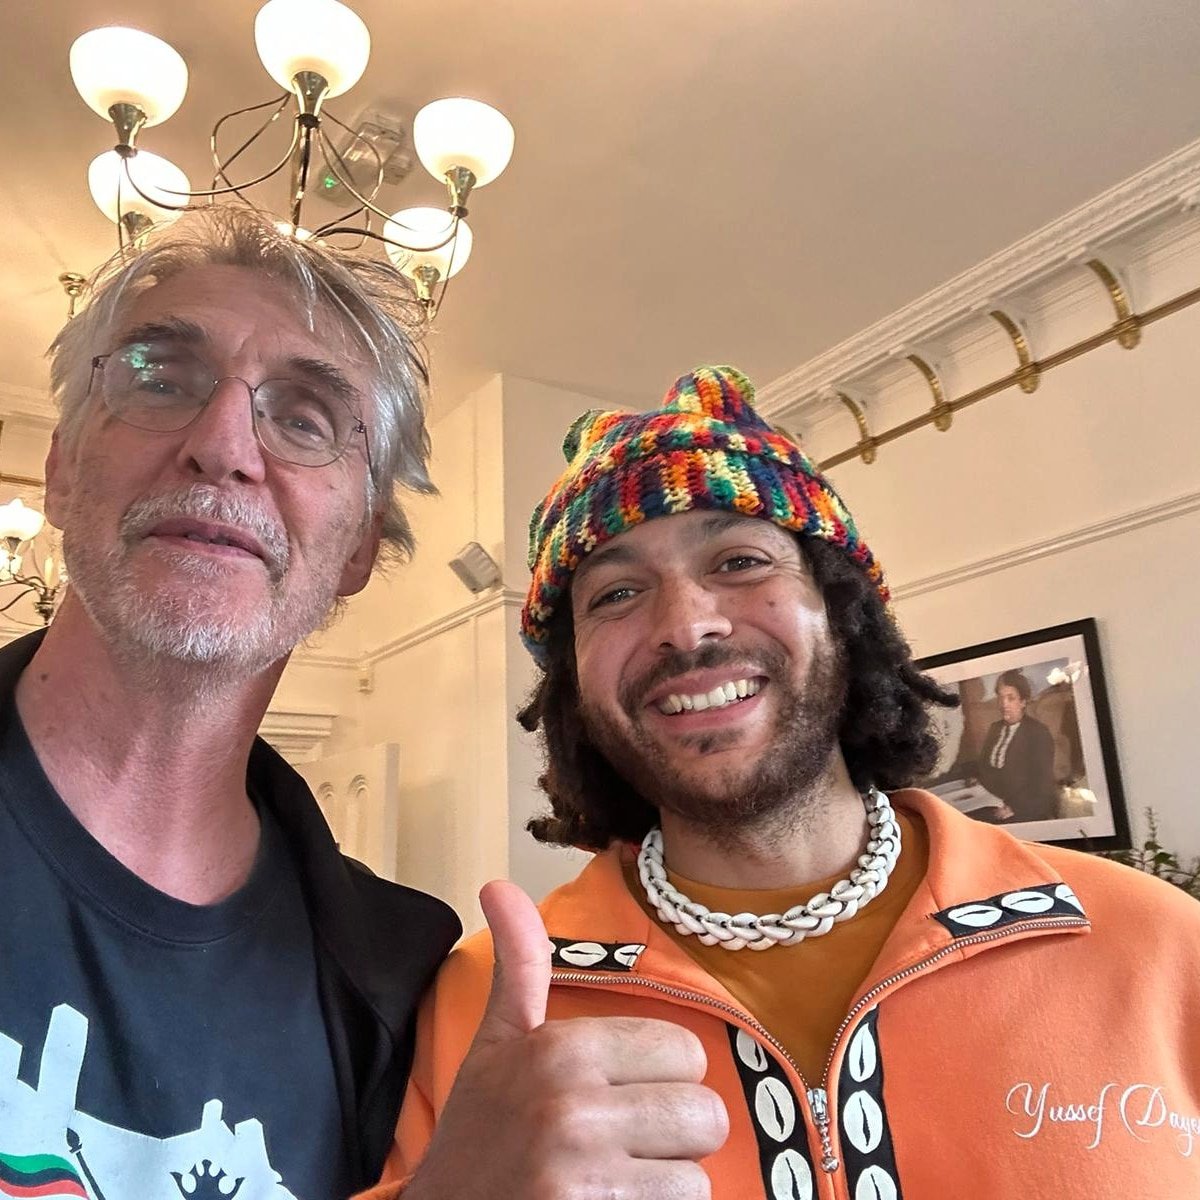 At Fairfield House recently it was a pleasure to have in the house exploring the legacy of HIM the multi talented musician and composer @YussefDayes 🥁 We look forward to welcoming Yussef again and working together on future projects 💚💛❤️ #Fairfieldhouse #Bath #Haileselassie